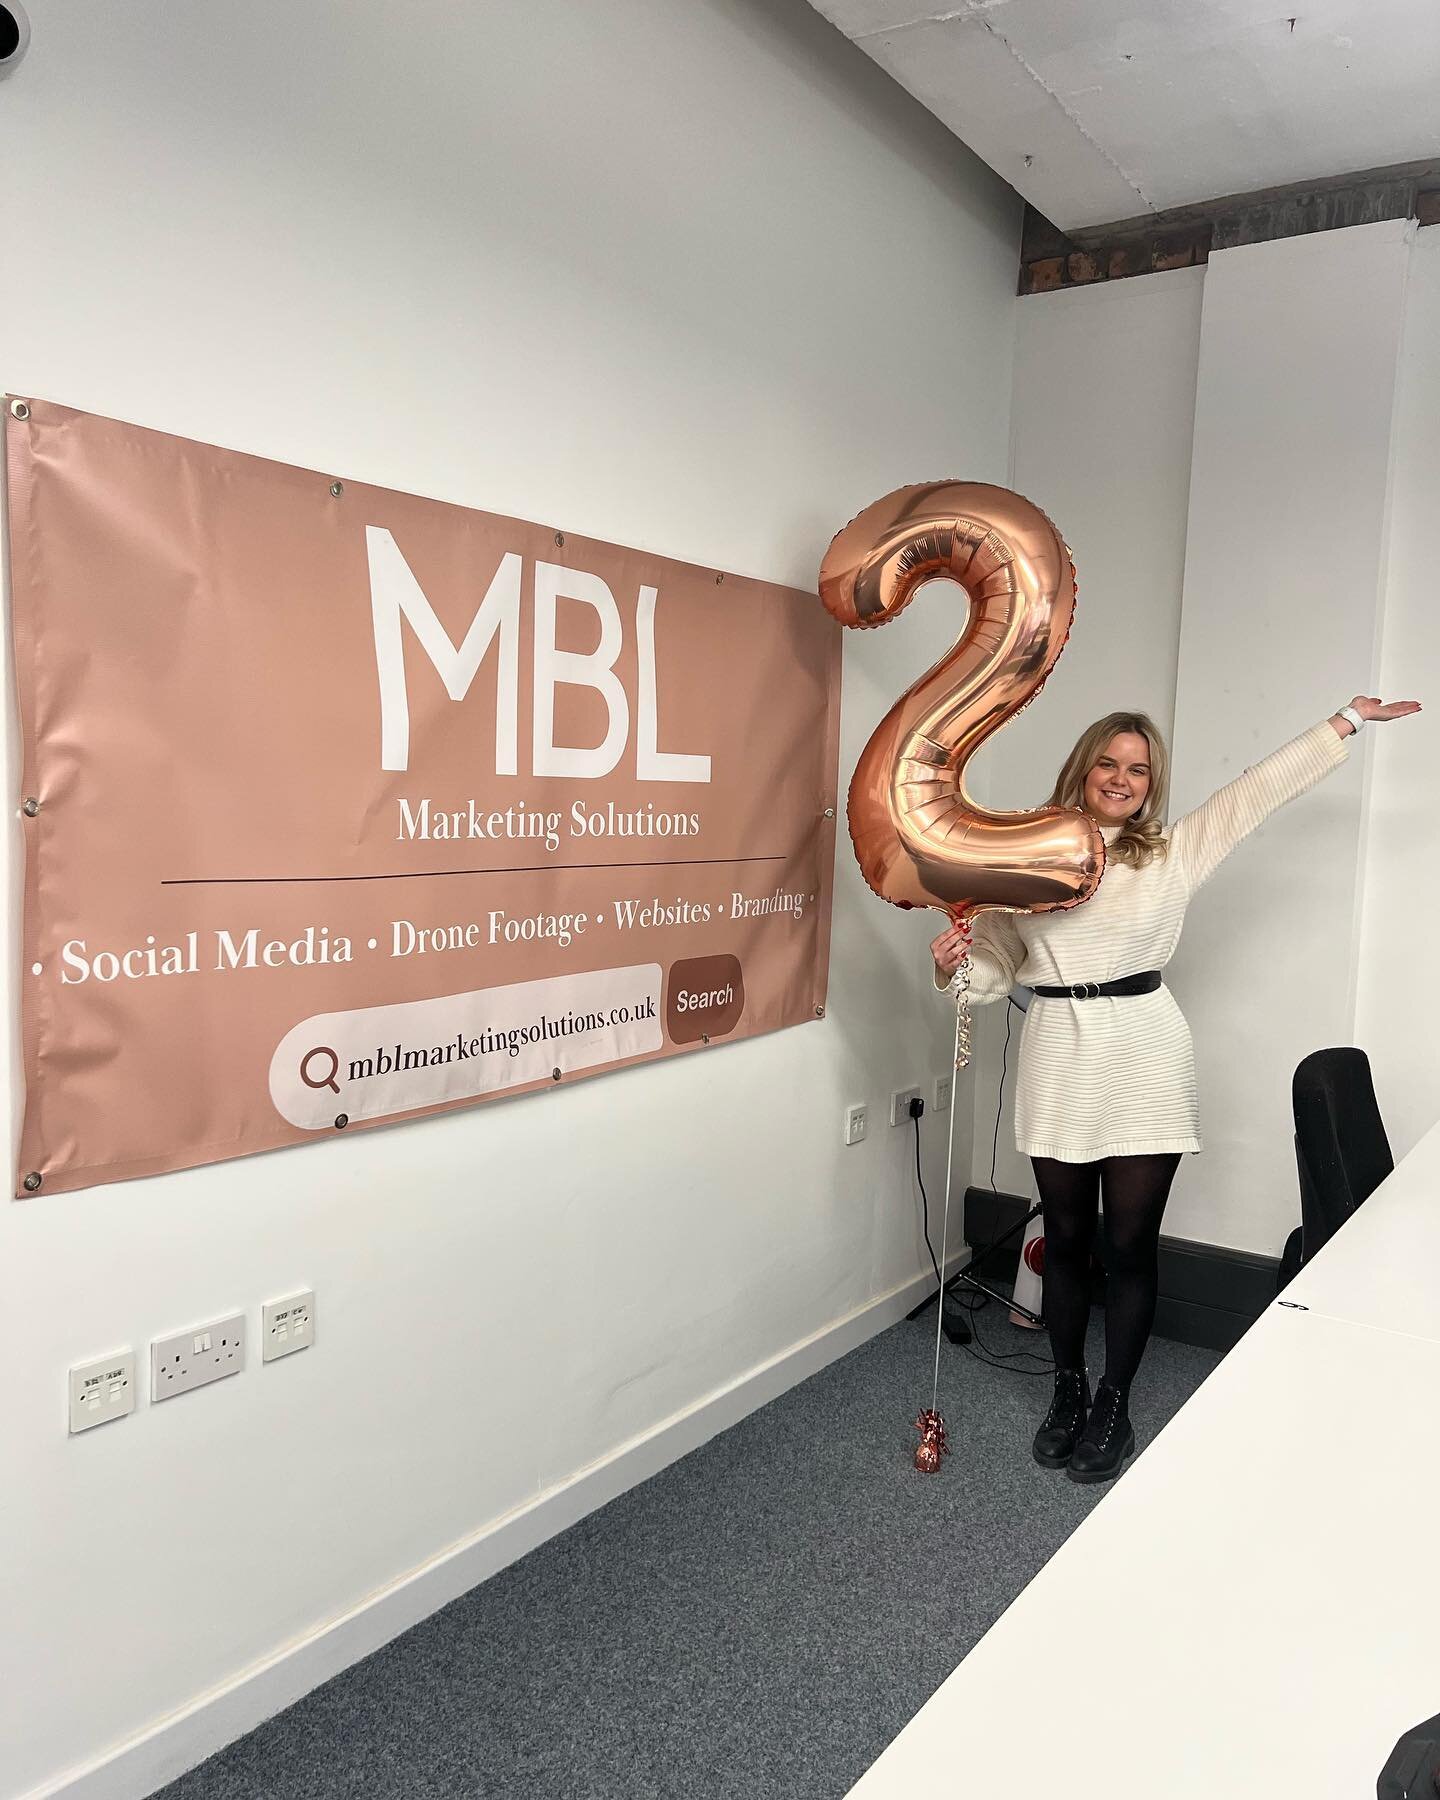 We&rsquo;ve turned 2 🥳

Two years have flown by 🤯

It&rsquo;s certainly been a rollercoaster but anyone who is in business will understand! It&rsquo;s been hard but I&rsquo;ve made sure to have a lot of fun along the way🤩

Friends, family and all 